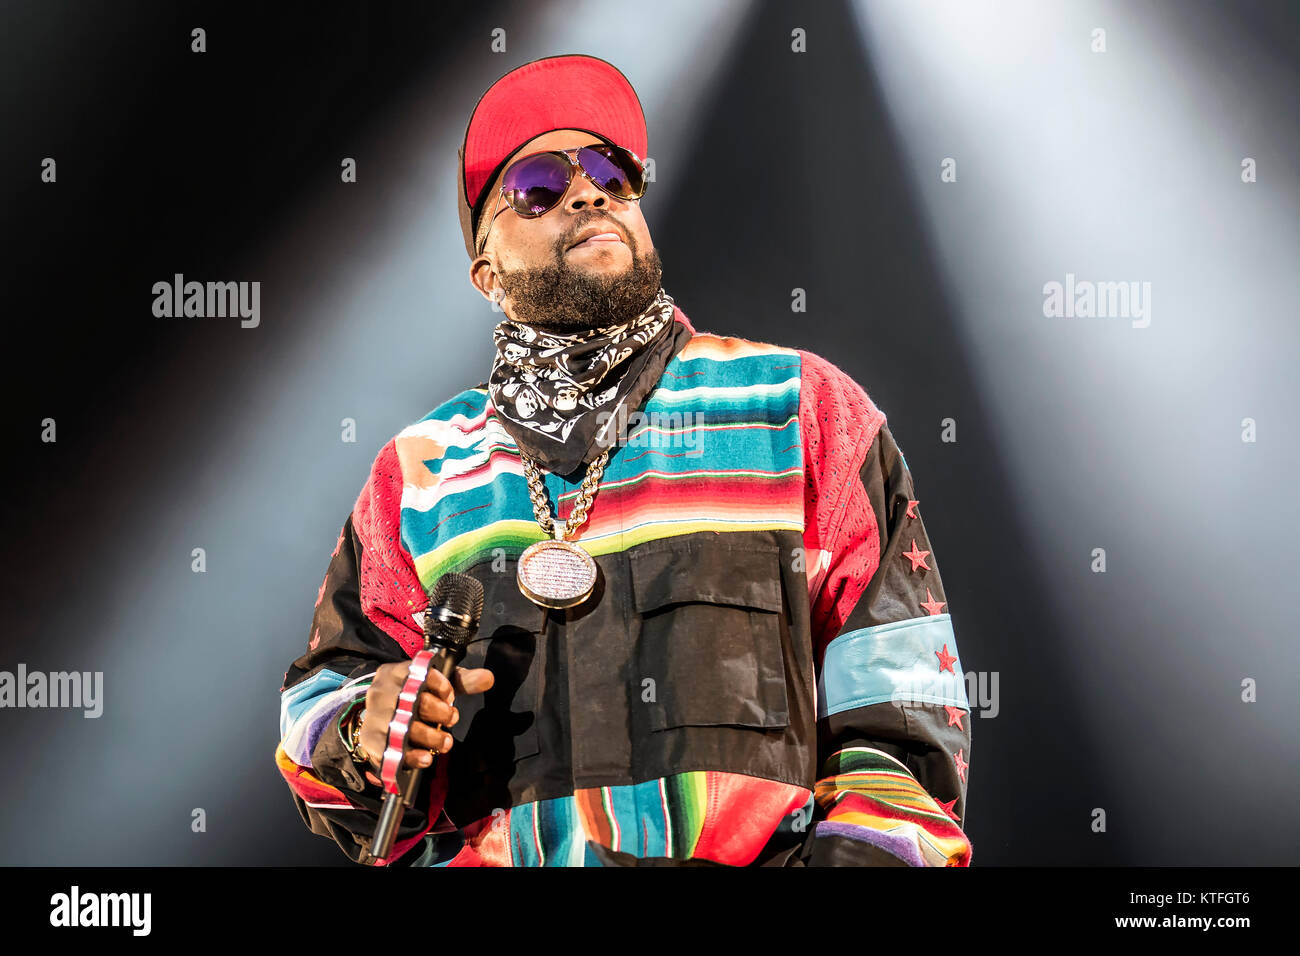 The American rap duo OutKast performs a live concert at the Norwegian music festival Øyafestivalen 2014. The Atlanta-based group consists of the two rappers André 3000 and Big Boi (pictured). Norway, 07.08.2014. Stock Photo